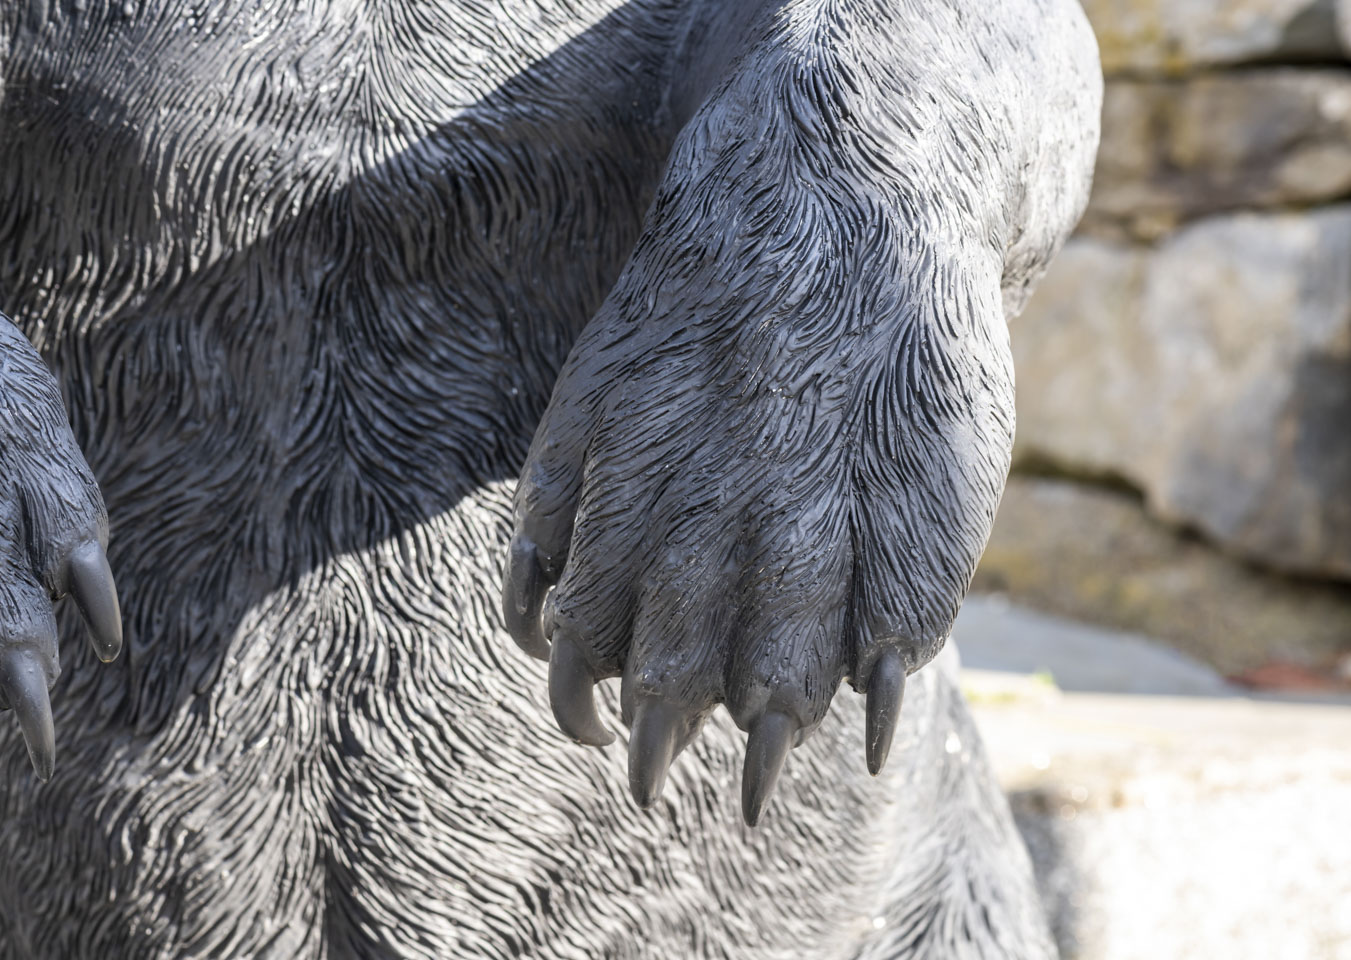 claws of bear statue